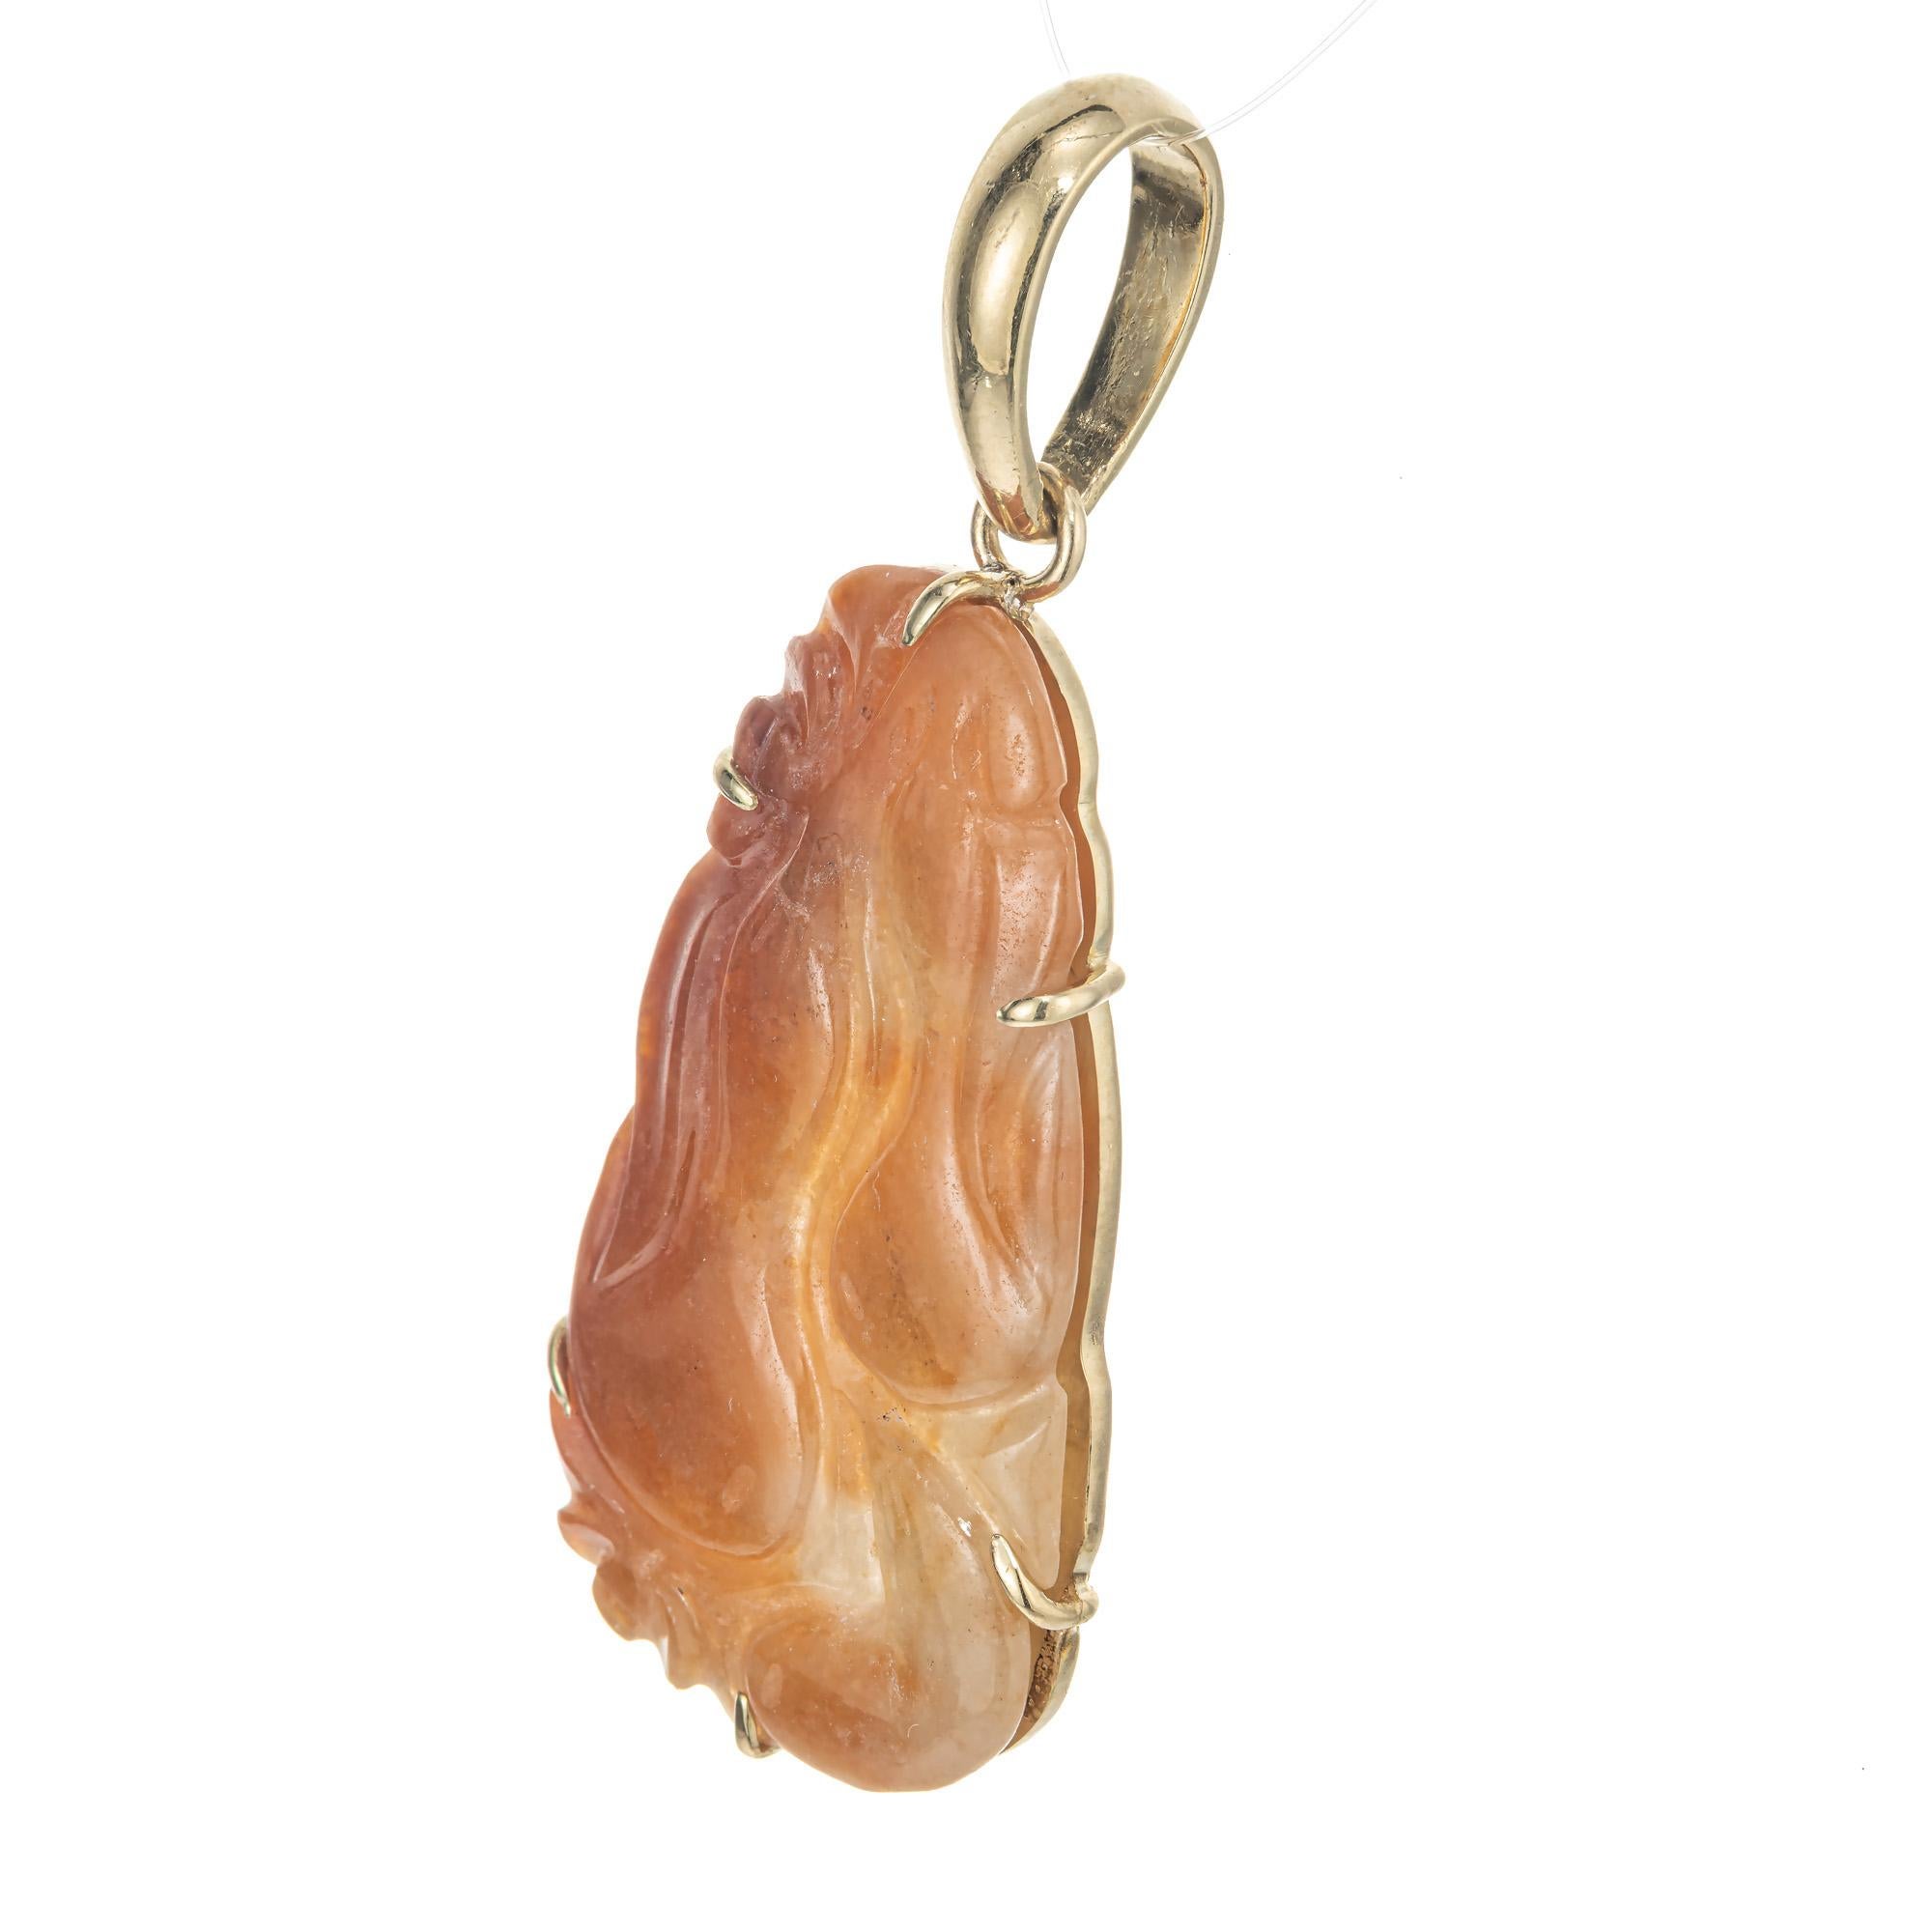 GIA Certified Deep Reddish orange hand carved natural untreated Jadeite Jade pendant. Set in a 18k yellow gold frame signed Satsky with a large substantial bail to accommodate larger chains.  

1 fancy carved mottled reddish orange translucent